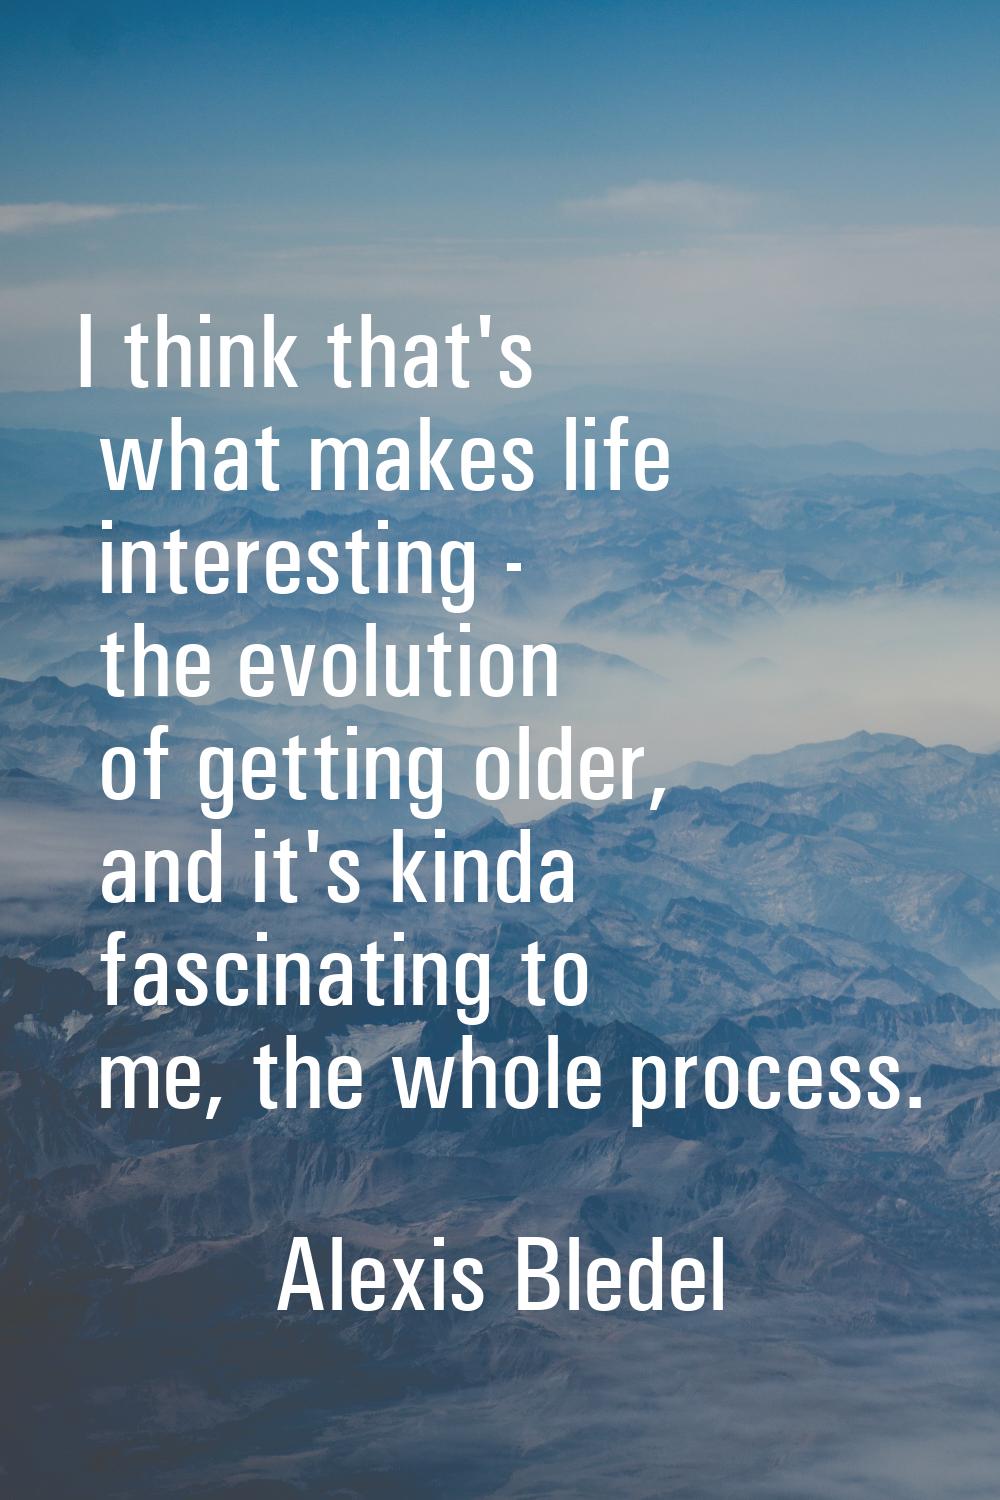 I think that's what makes life interesting - the evolution of getting older, and it's kinda fascina